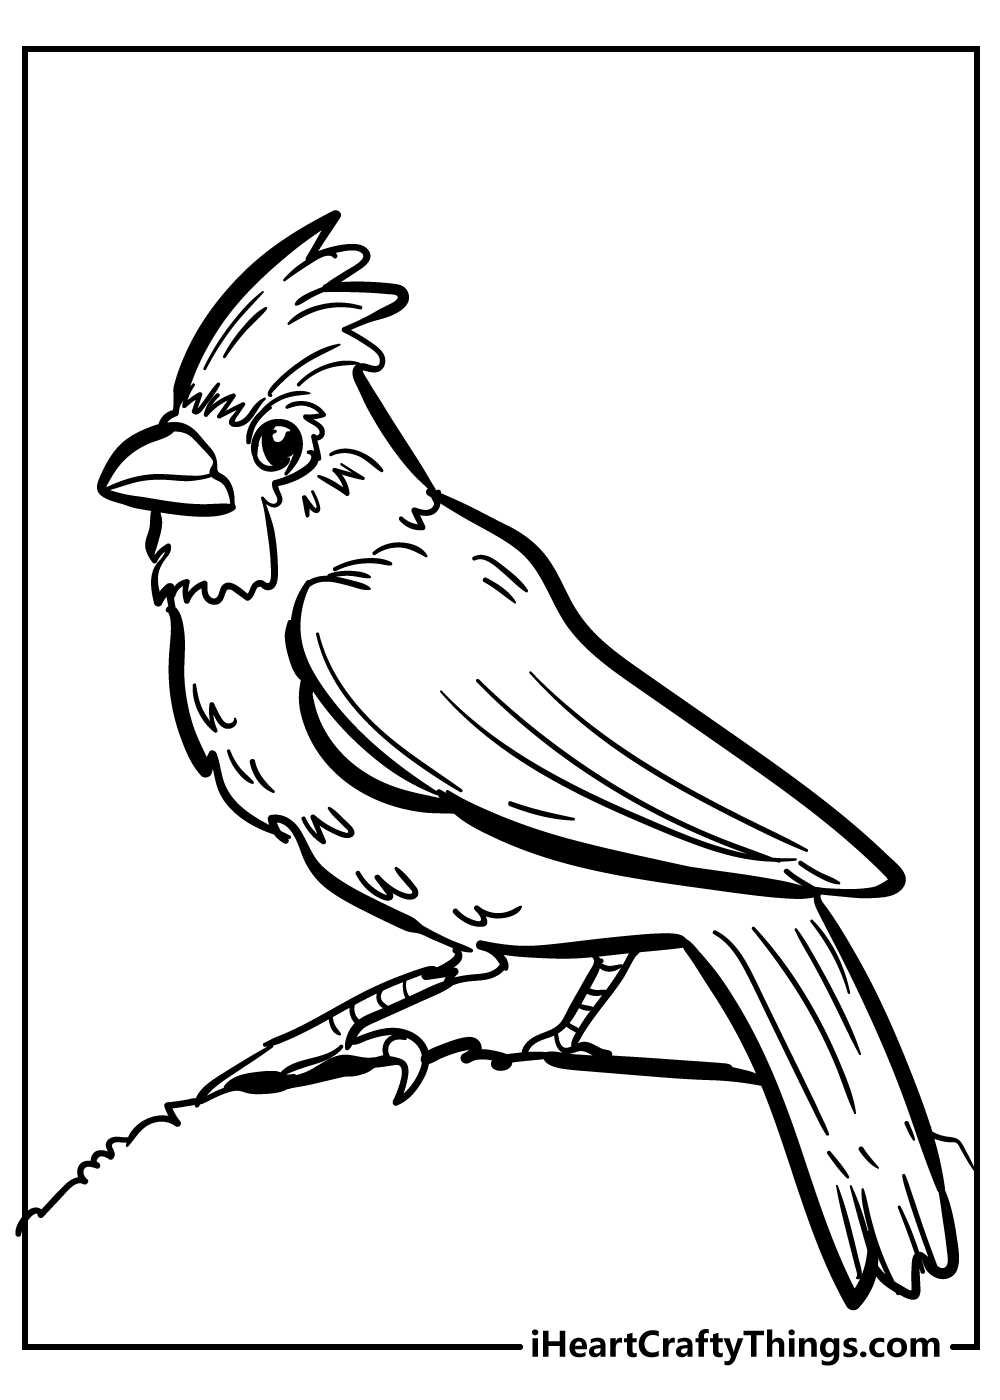 Bird Coloring Pages free pdf download